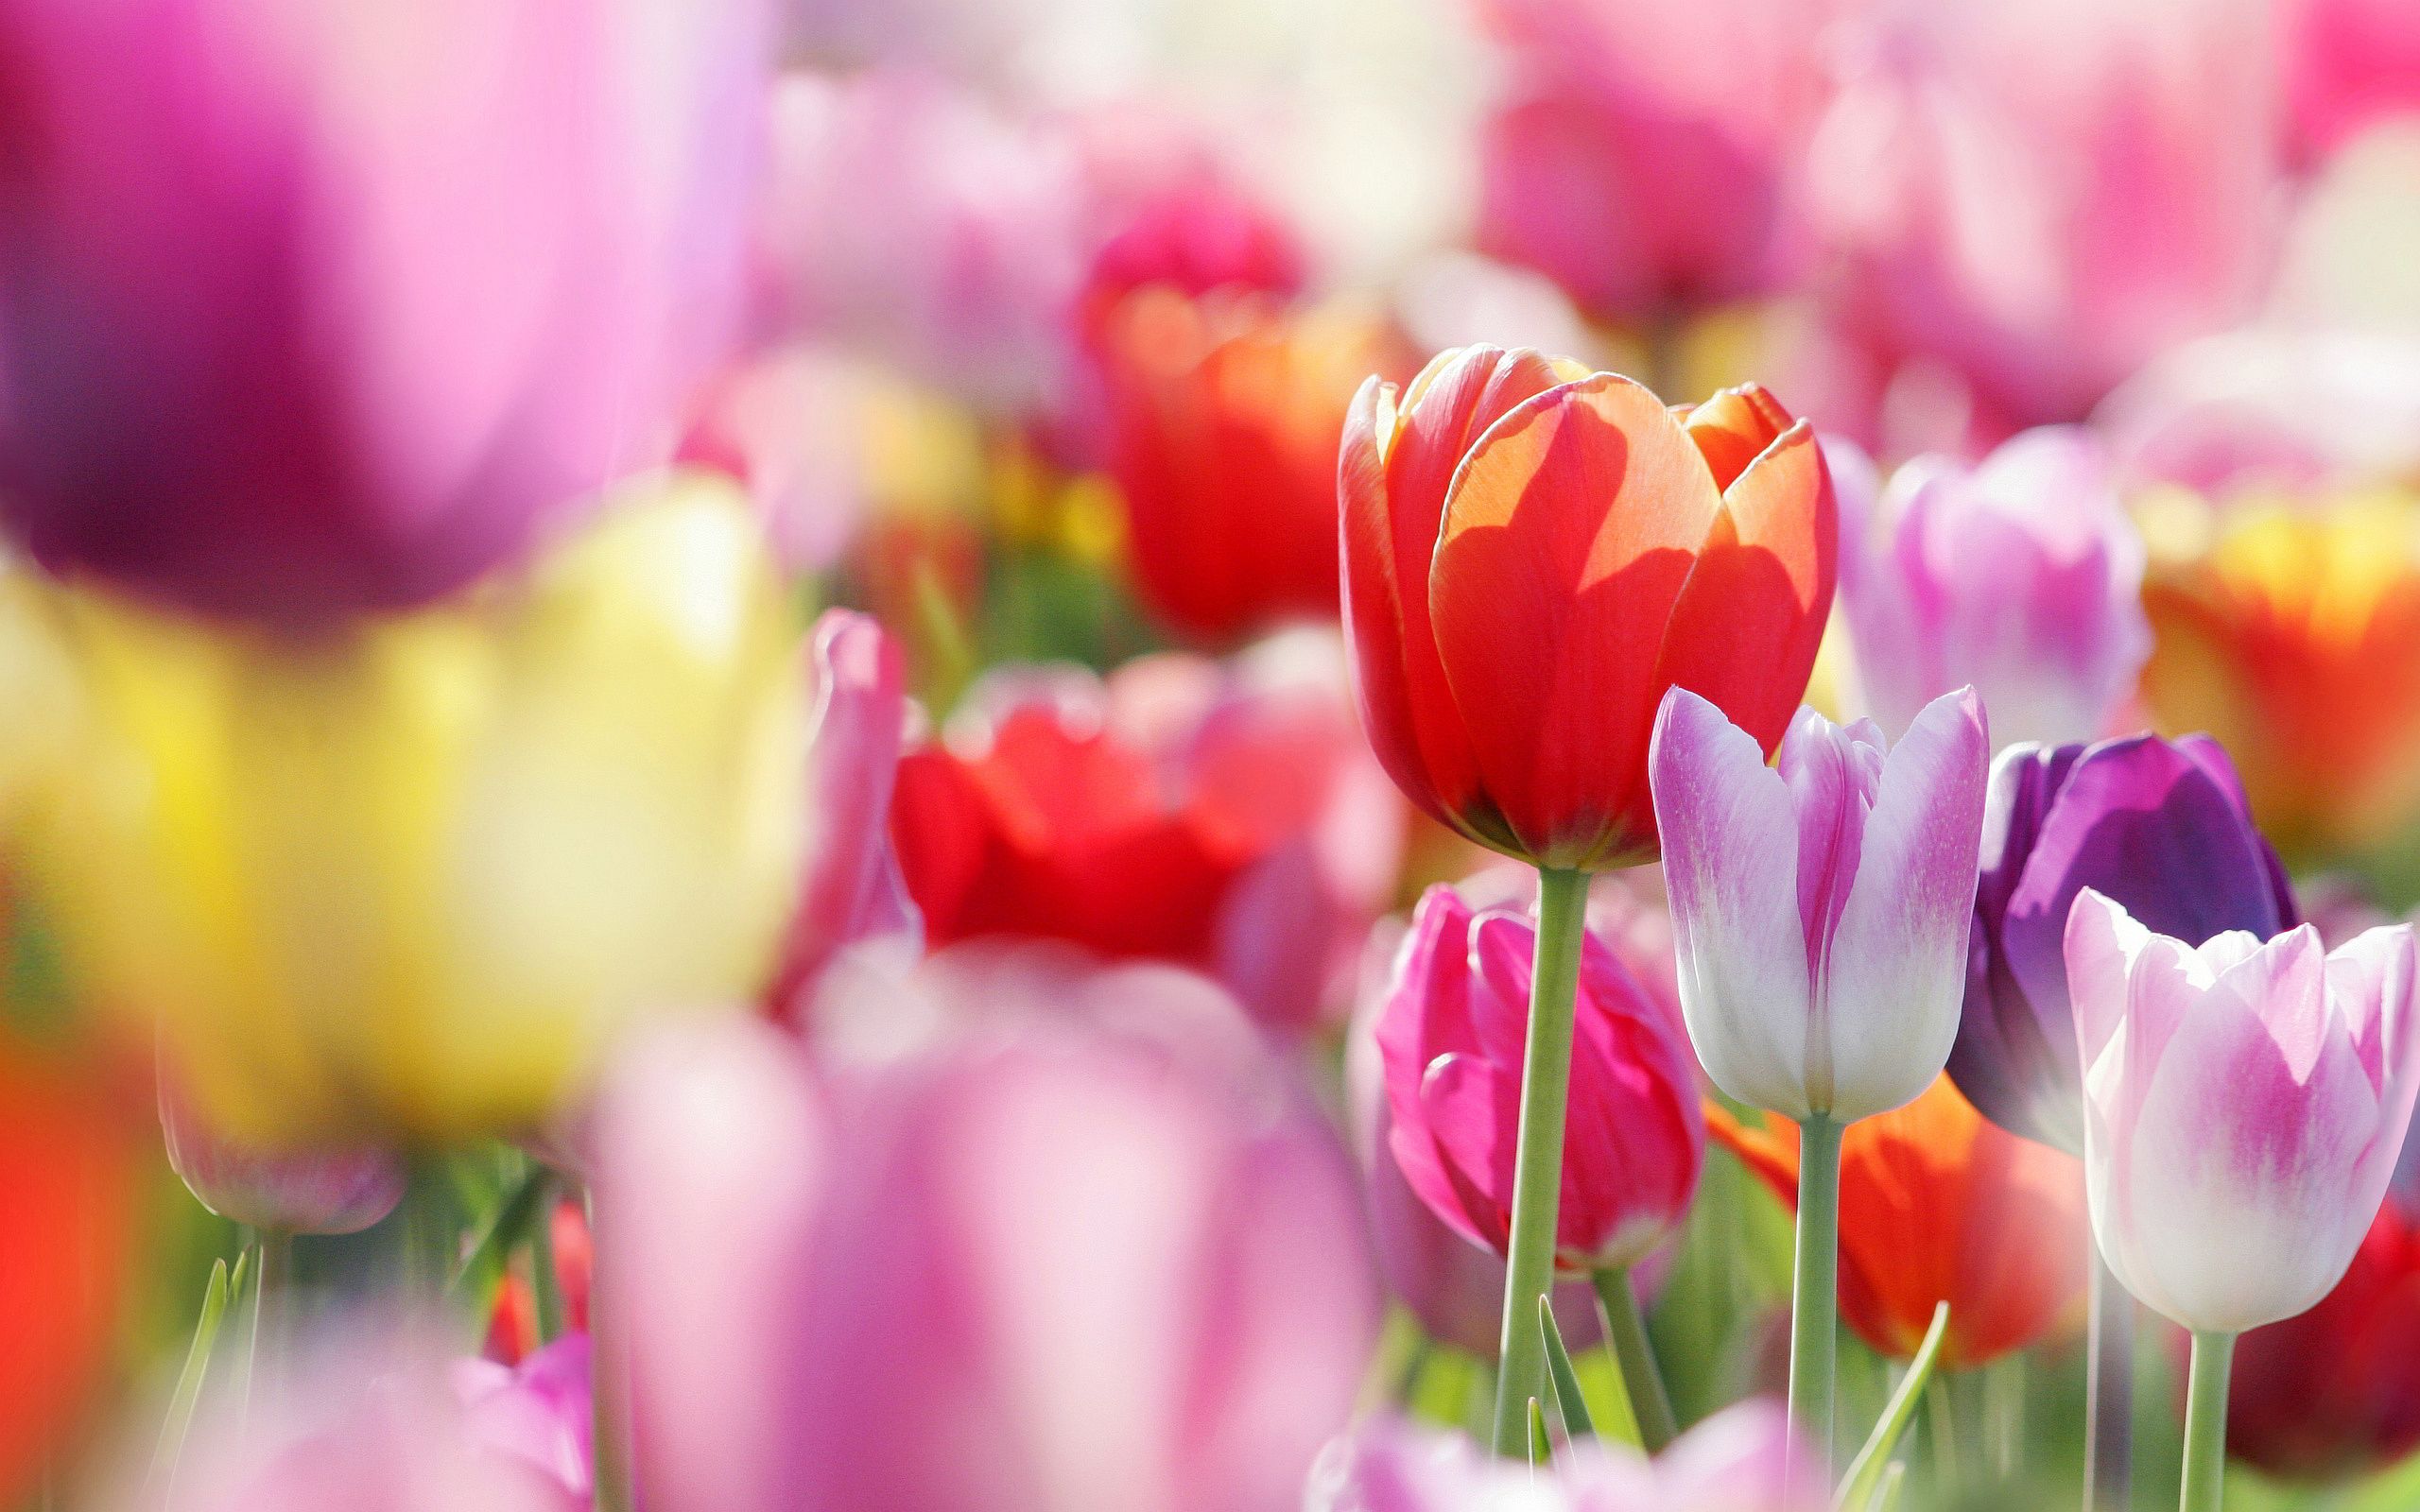 Colorful Tulips Wallpaper 44627 2560x1600px